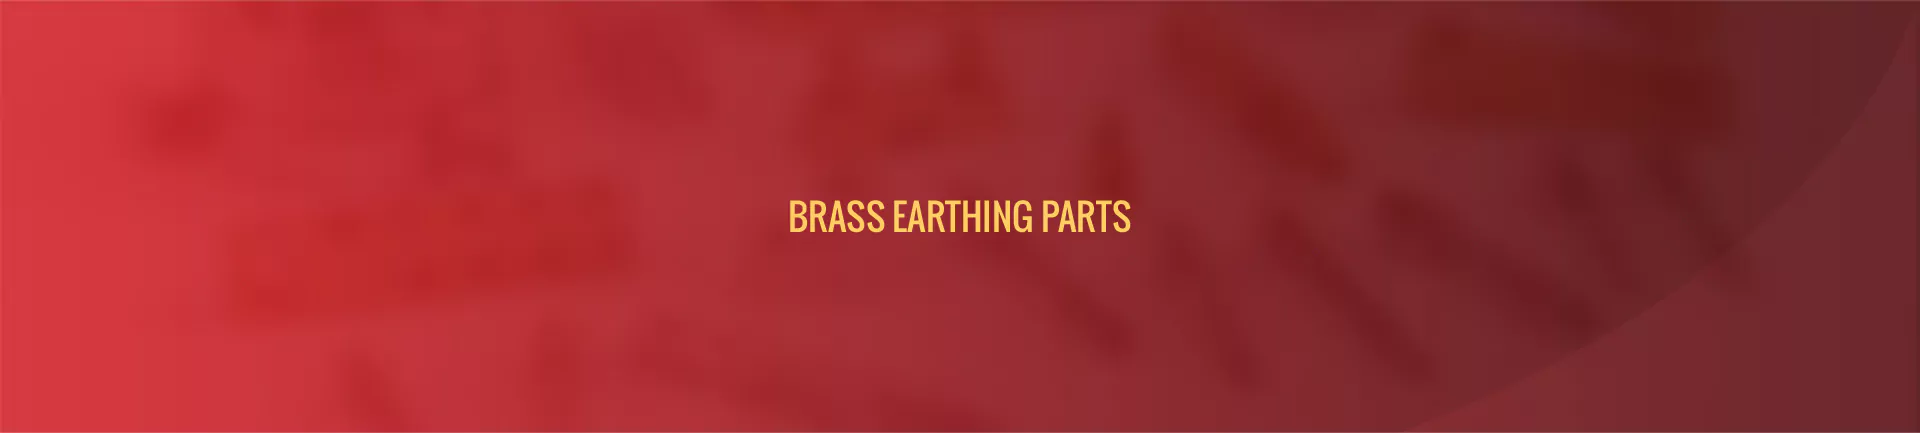 brass-earthing-parts-banner